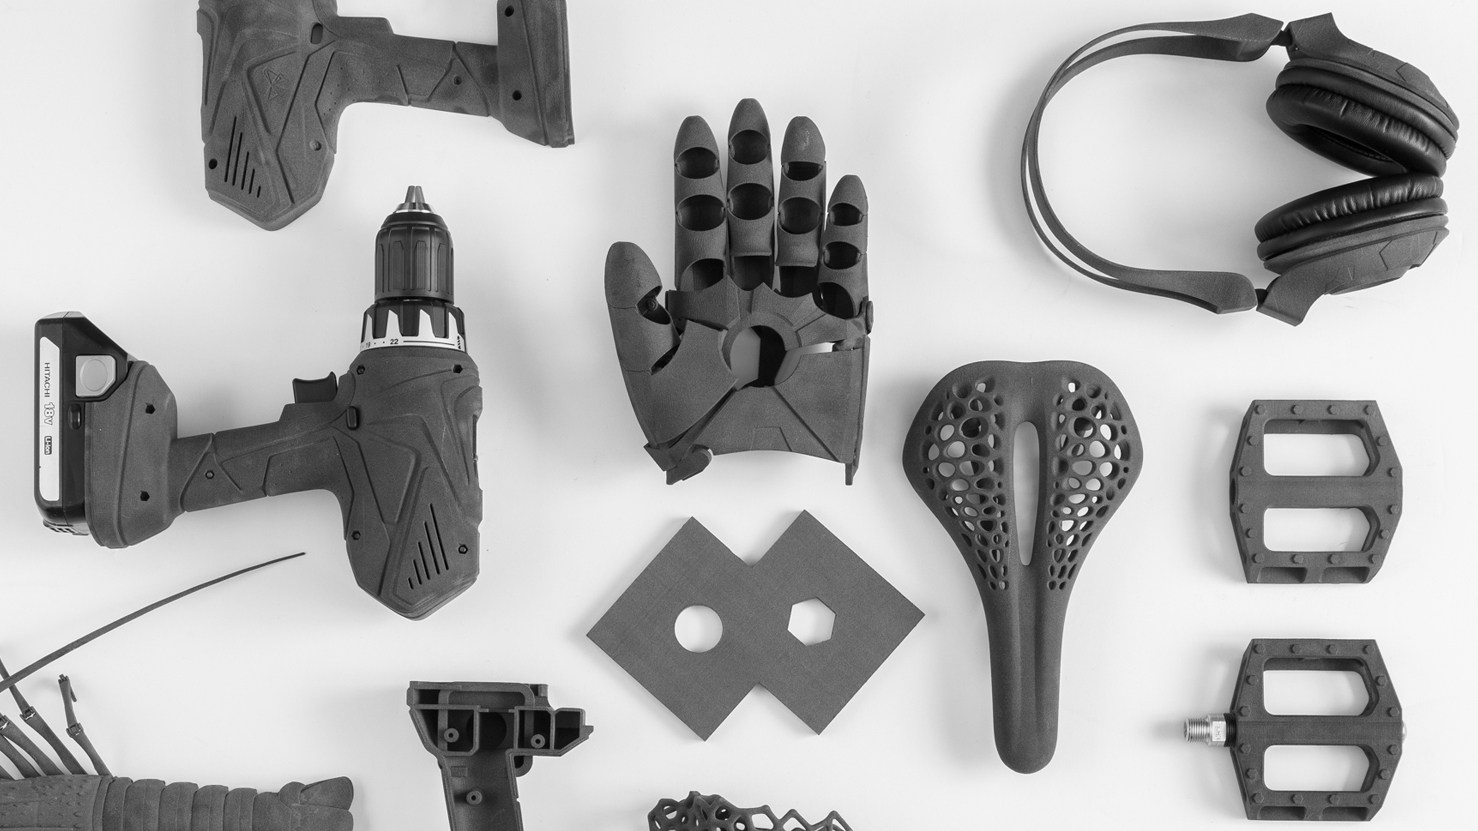  The possibilities of 3D printing 